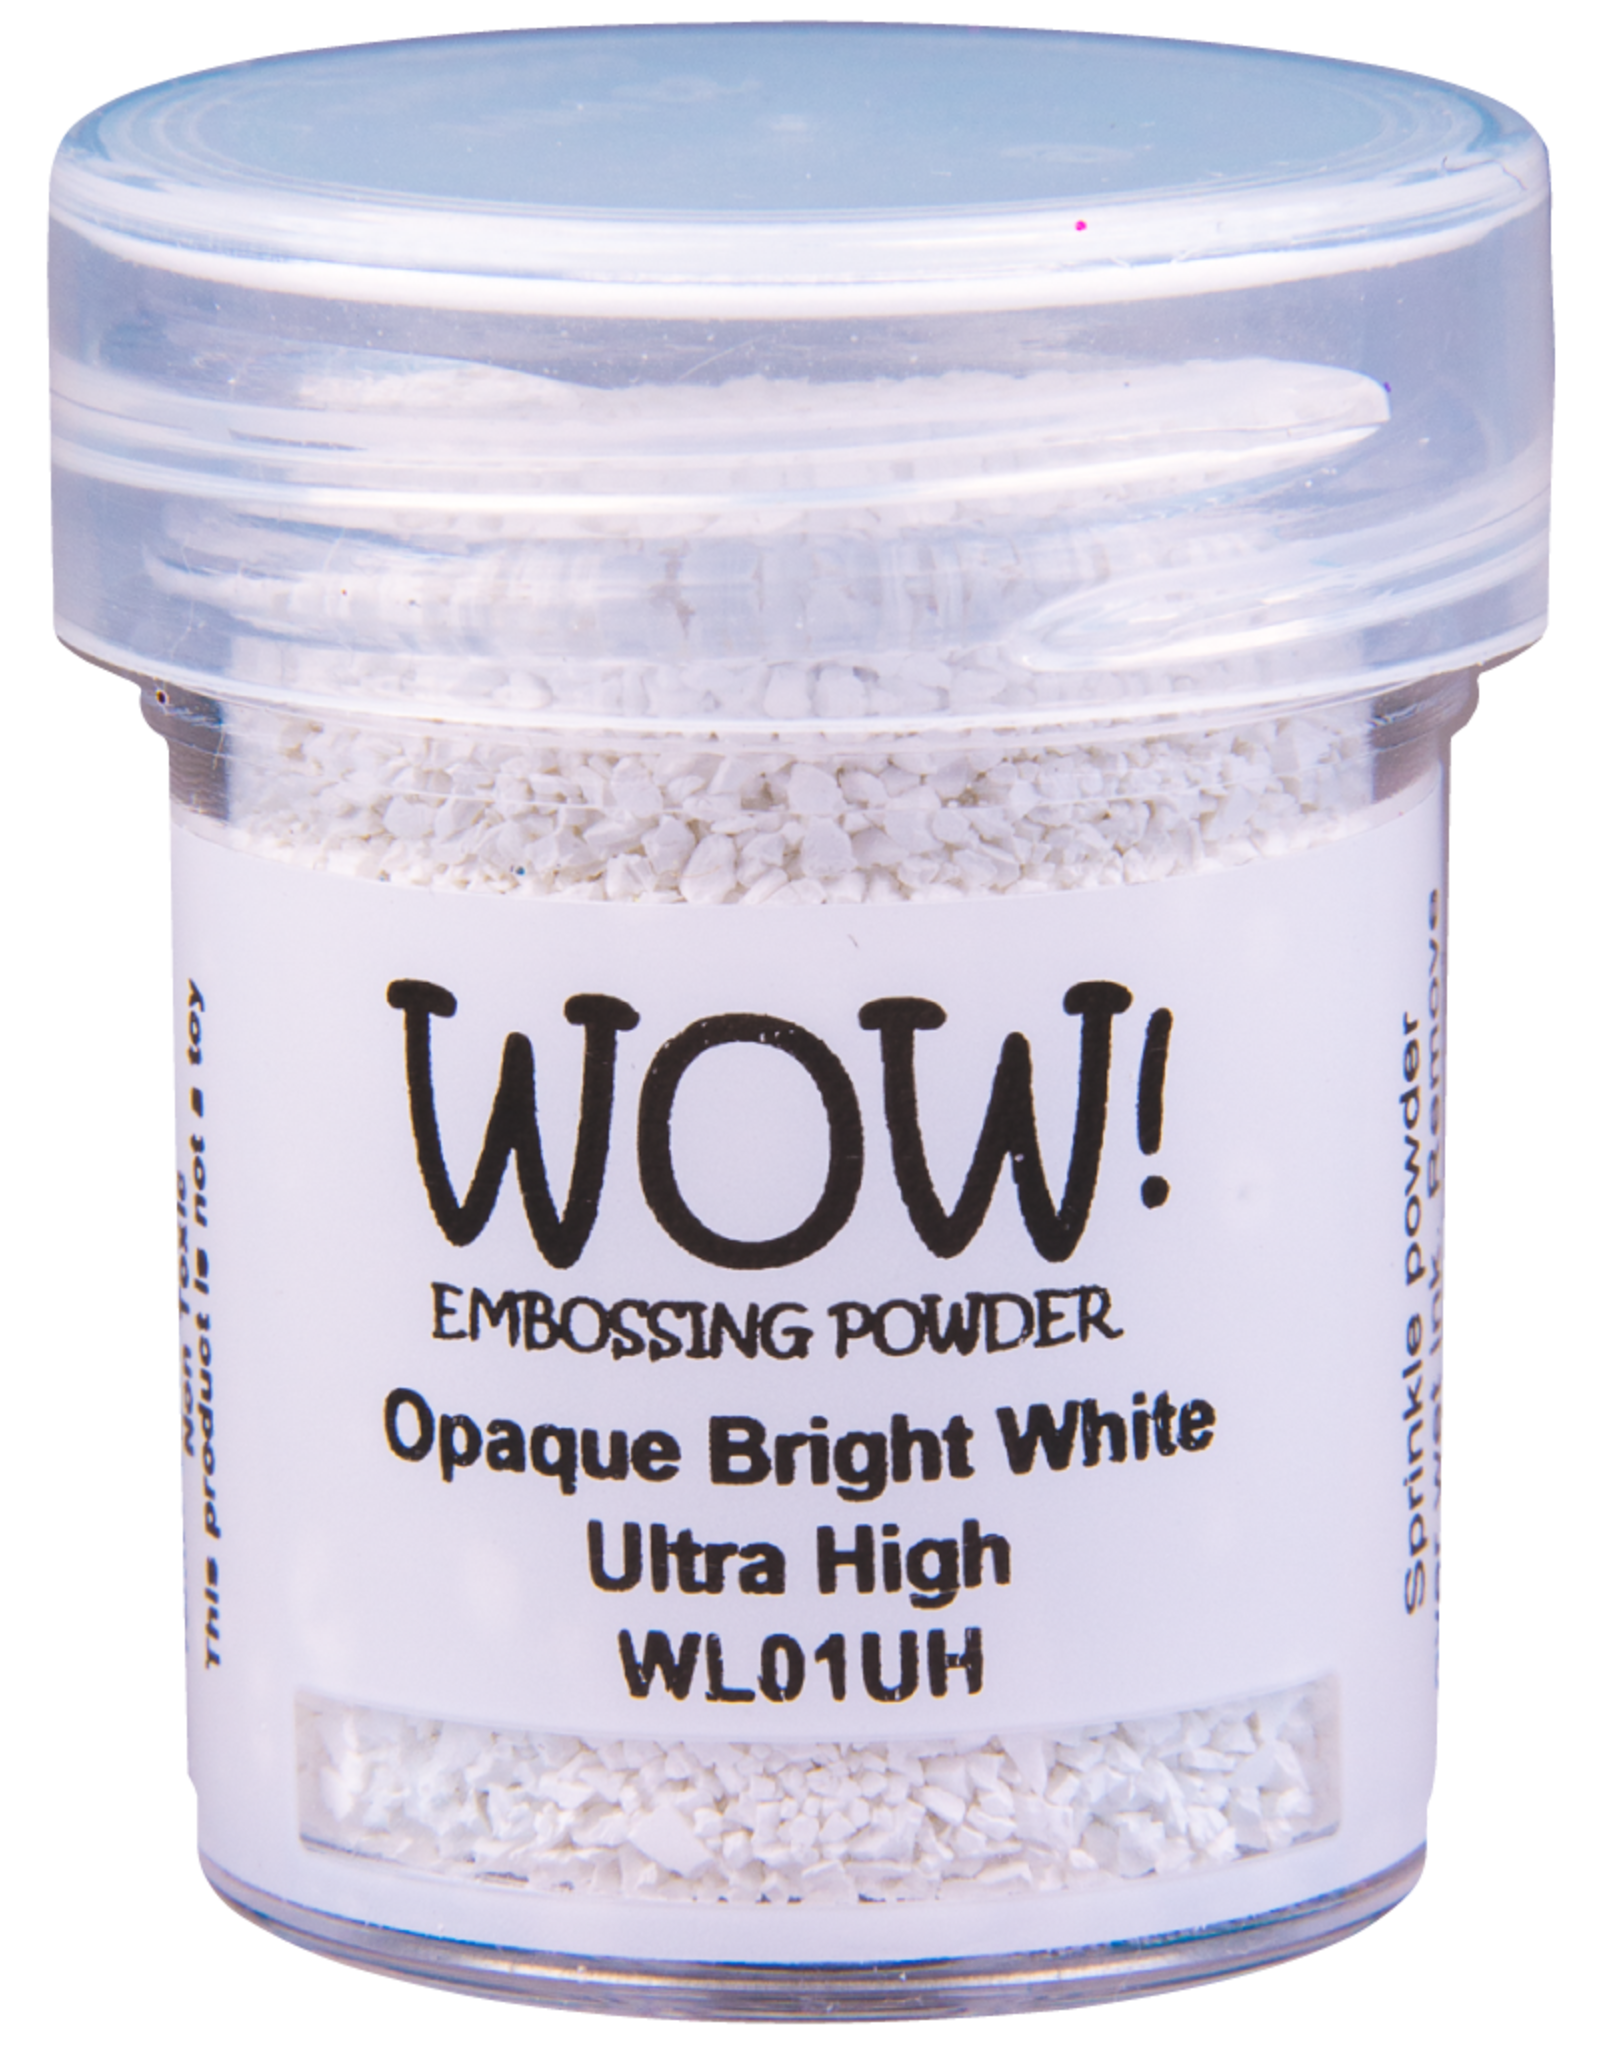 WOW! WOW! OPAQUE BRIGHT WHITE ULTRA HIGH EMBOSSING POWDER 0.5OZ